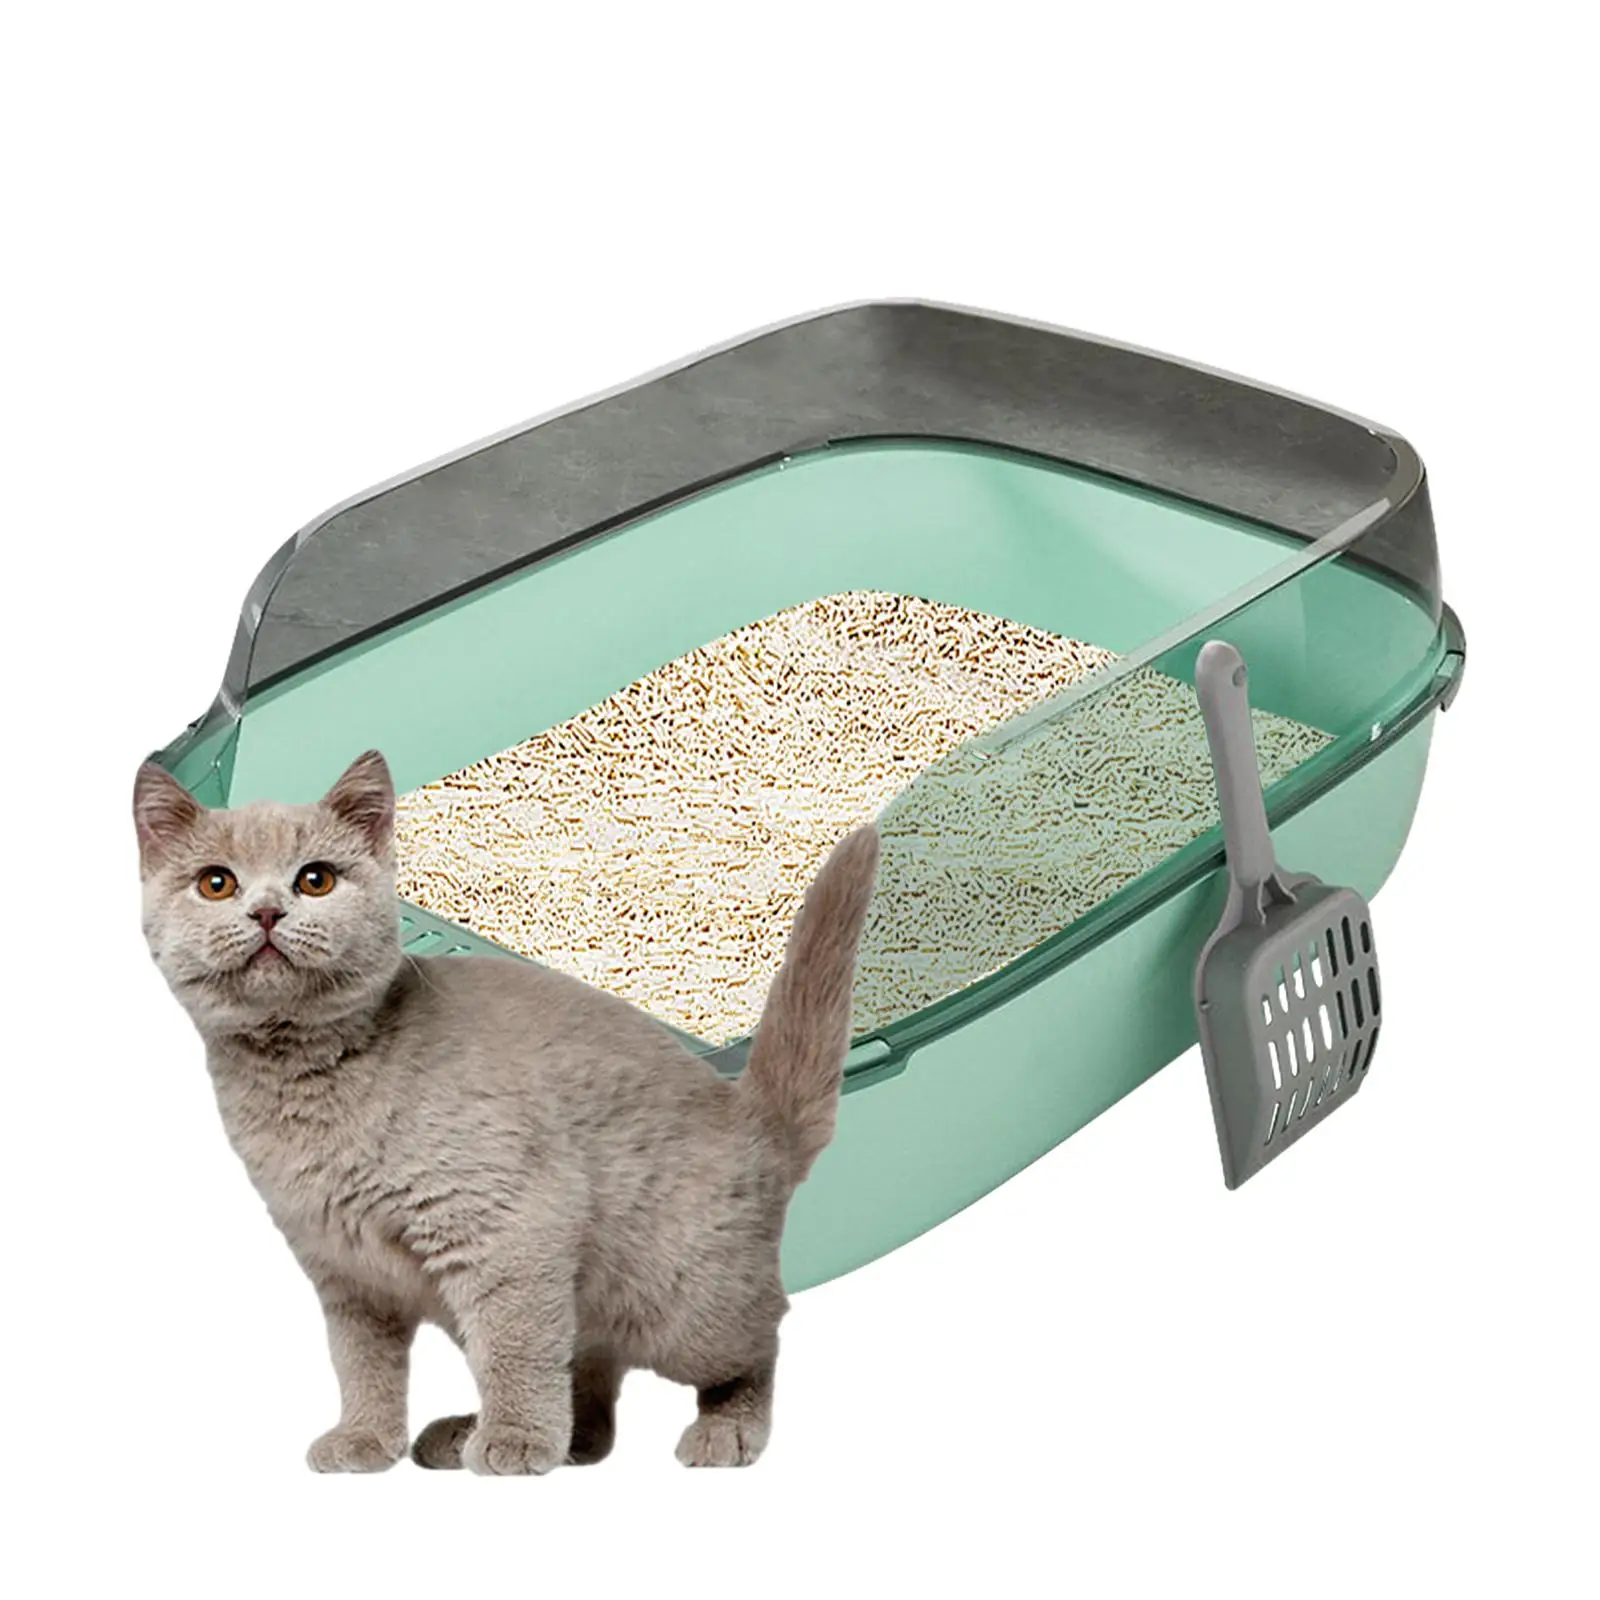 Cat Litter Box Semi Enclosed Tall Spray Shield Detachable Supplies Easy to Clean Bedpan Plastic Sturdy Cat Litter Tray Kitty